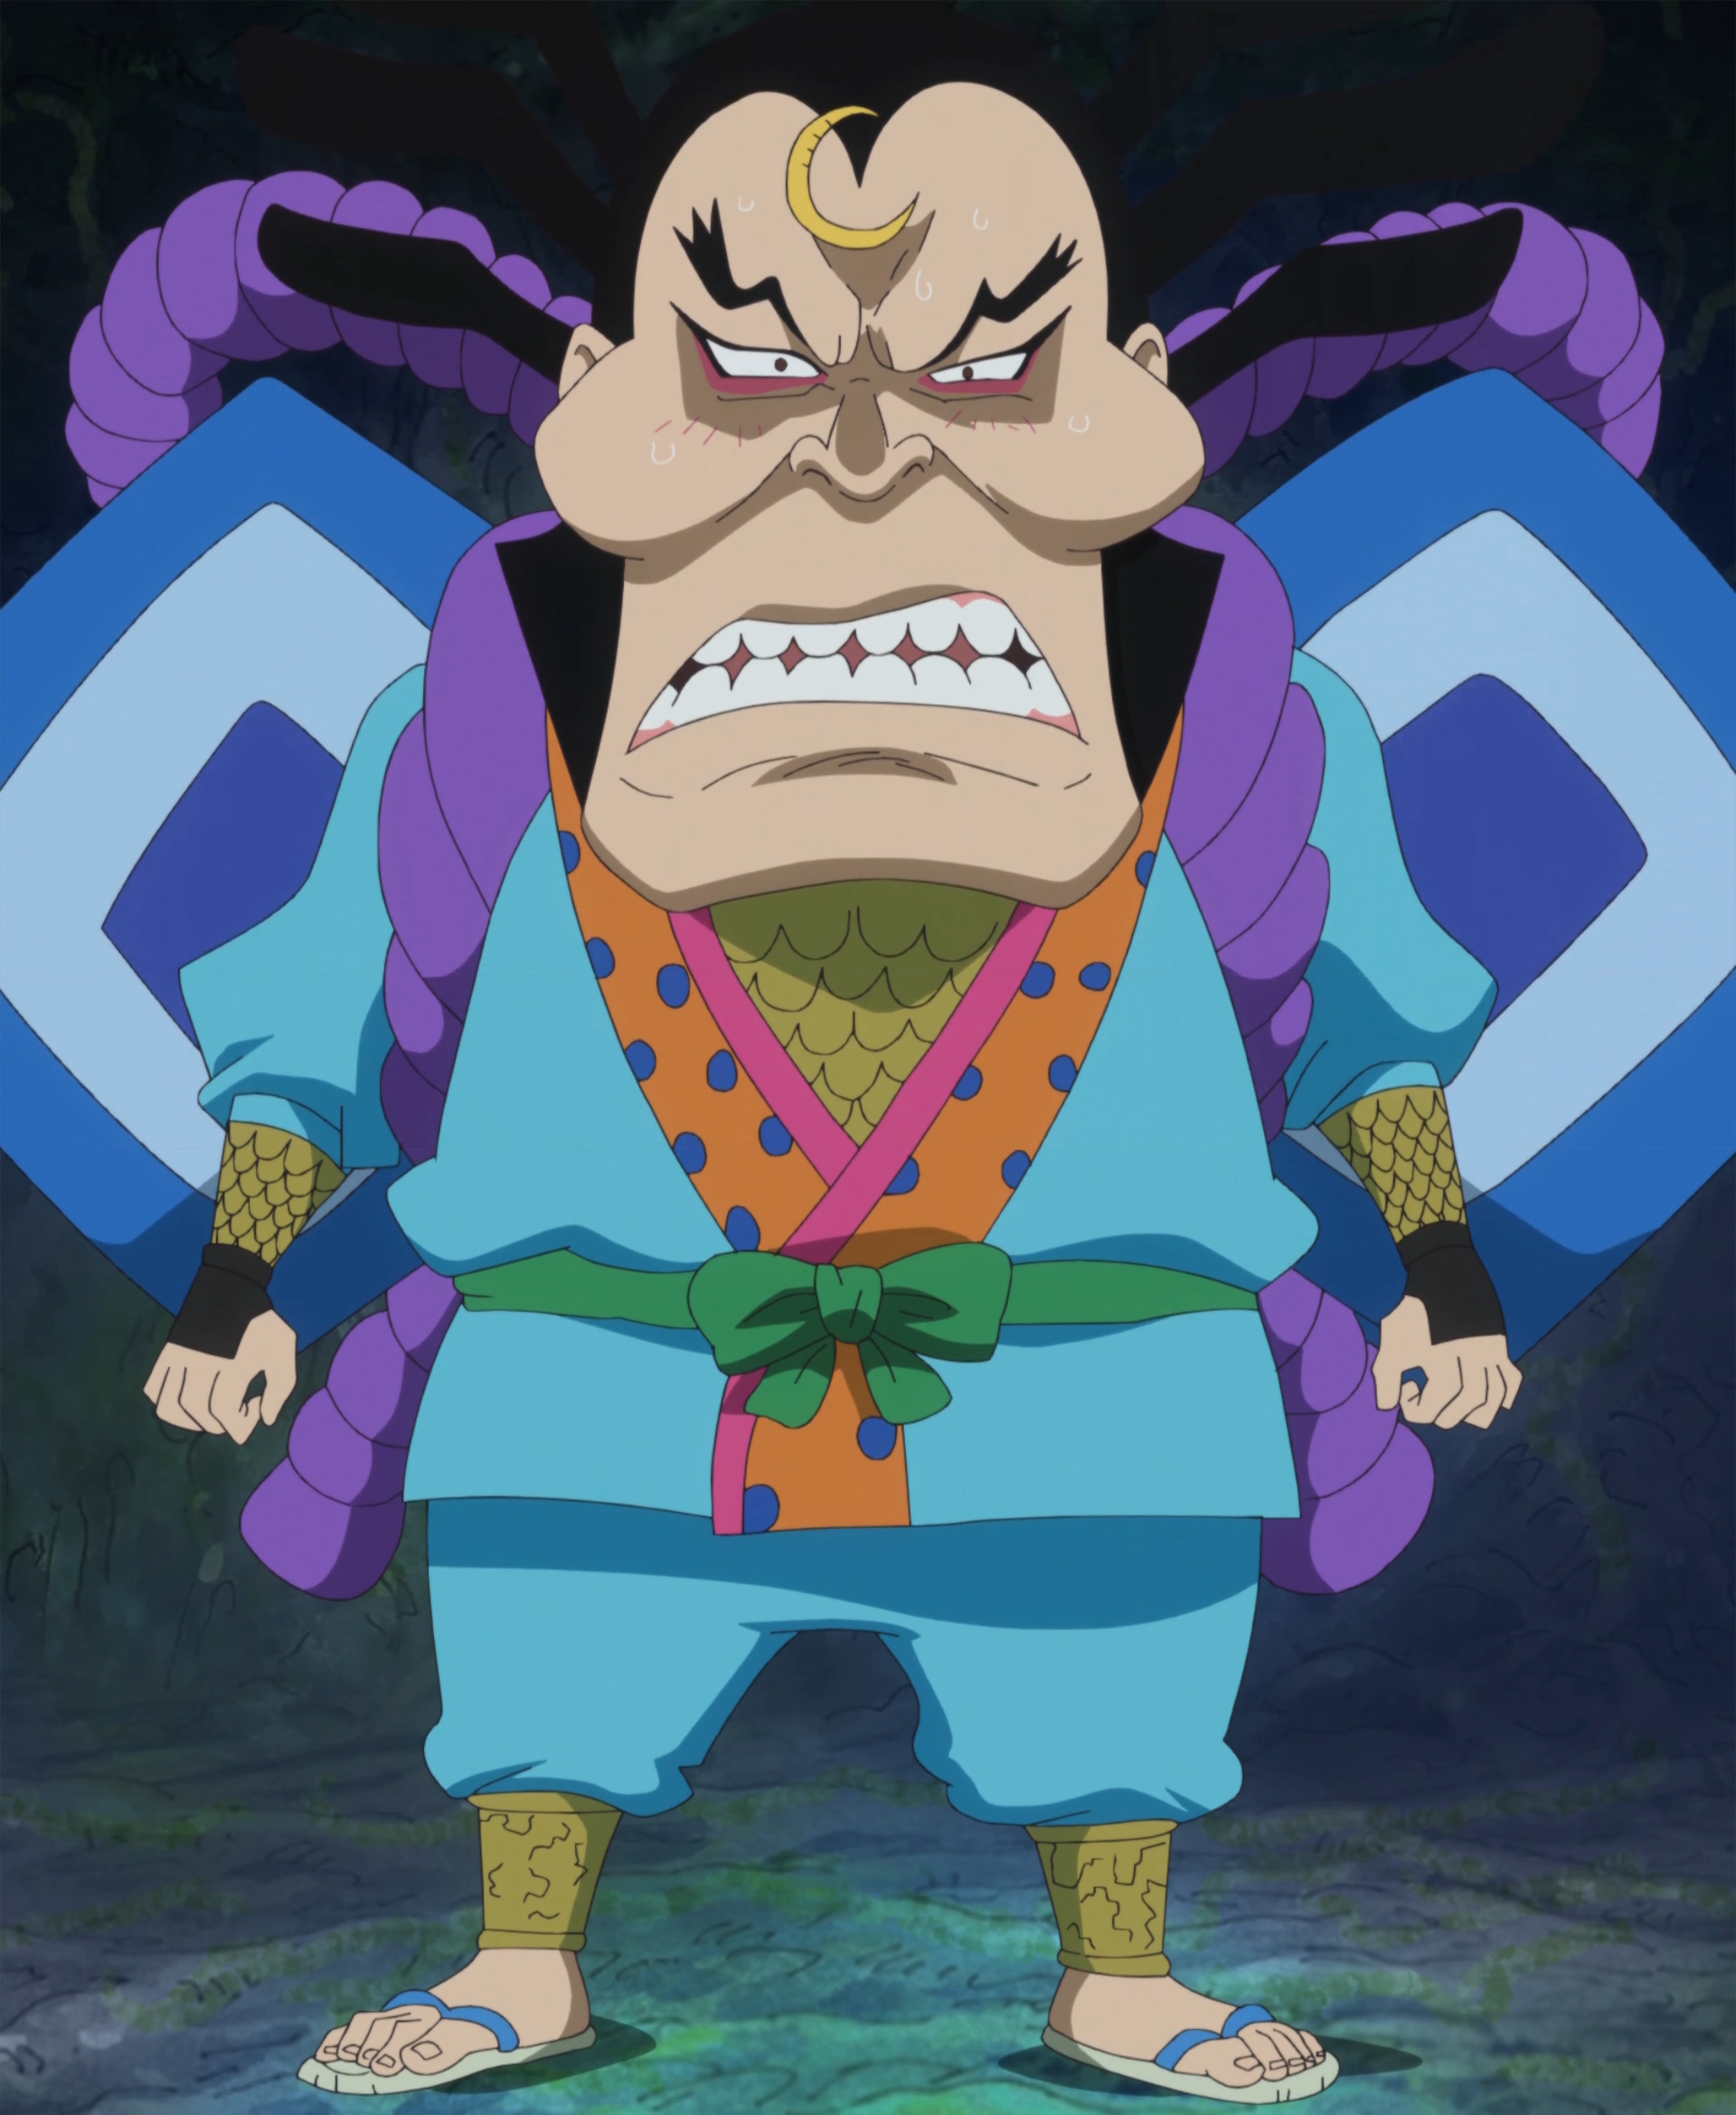 One Piece: WANO KUNI (892-Current) The Pact Between Men! The